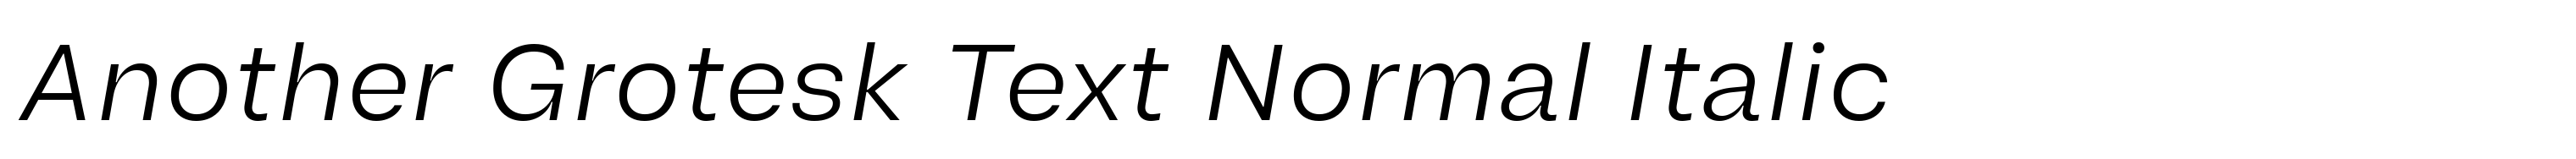 Another Grotesk Text Normal Italic